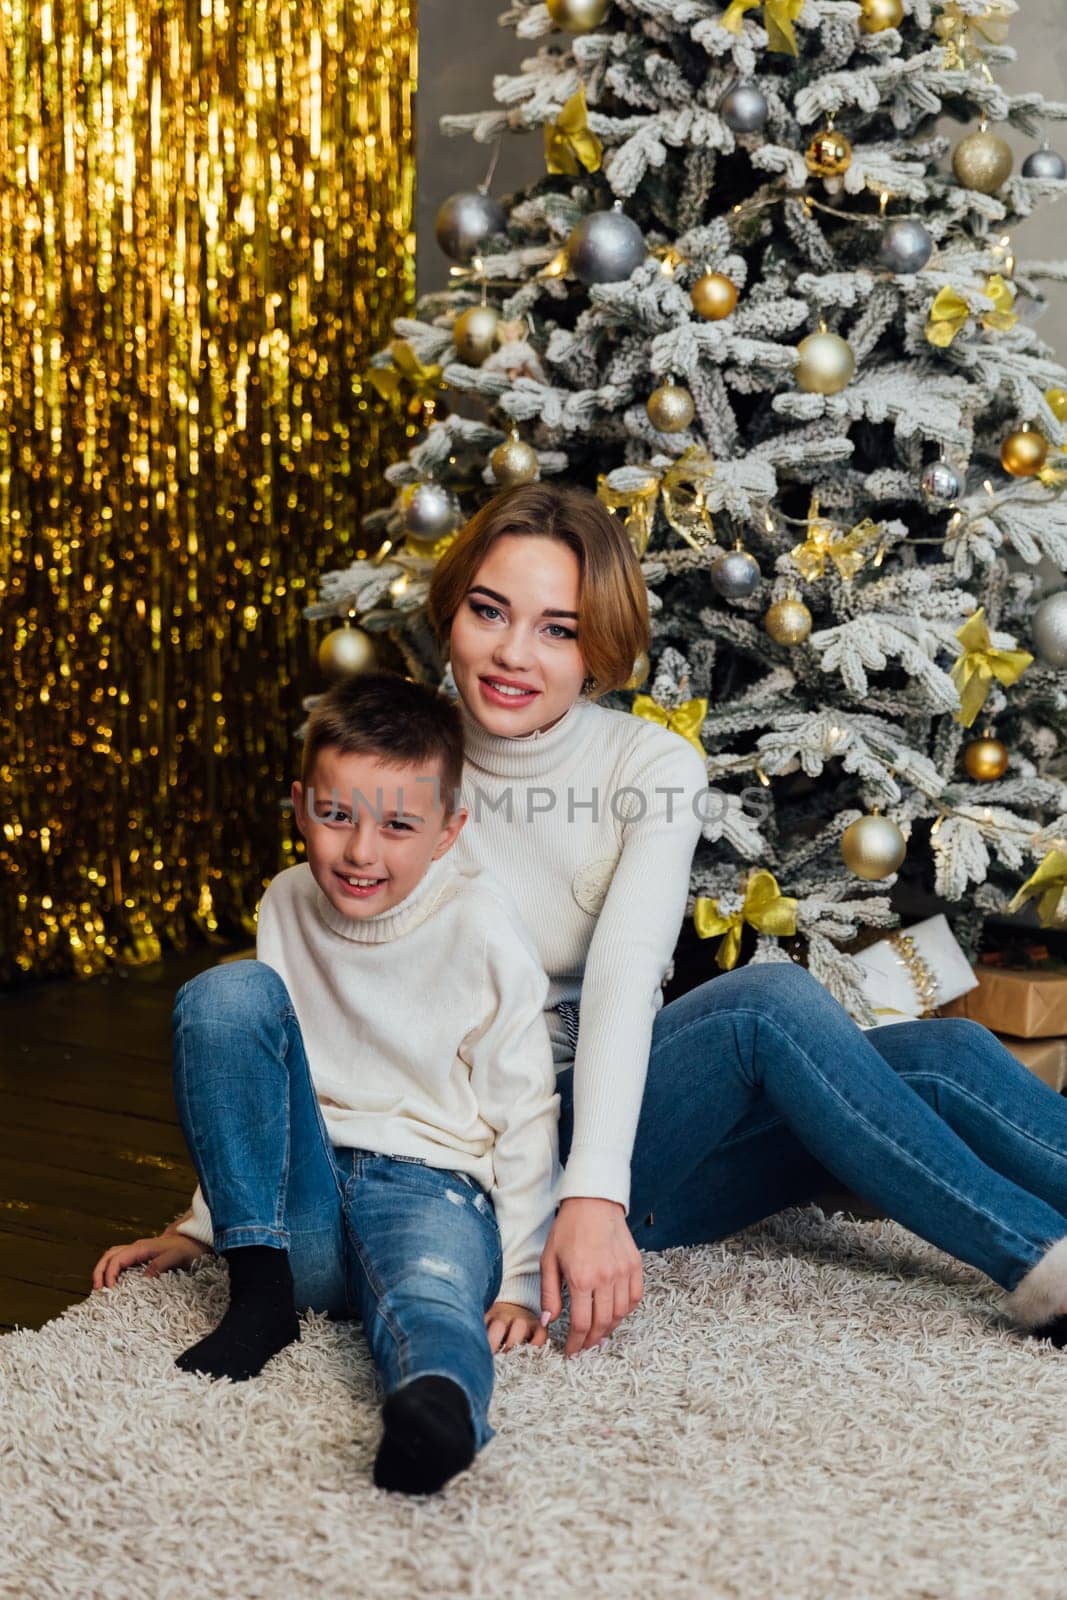 Mom with son at christmas tree with gifts new year